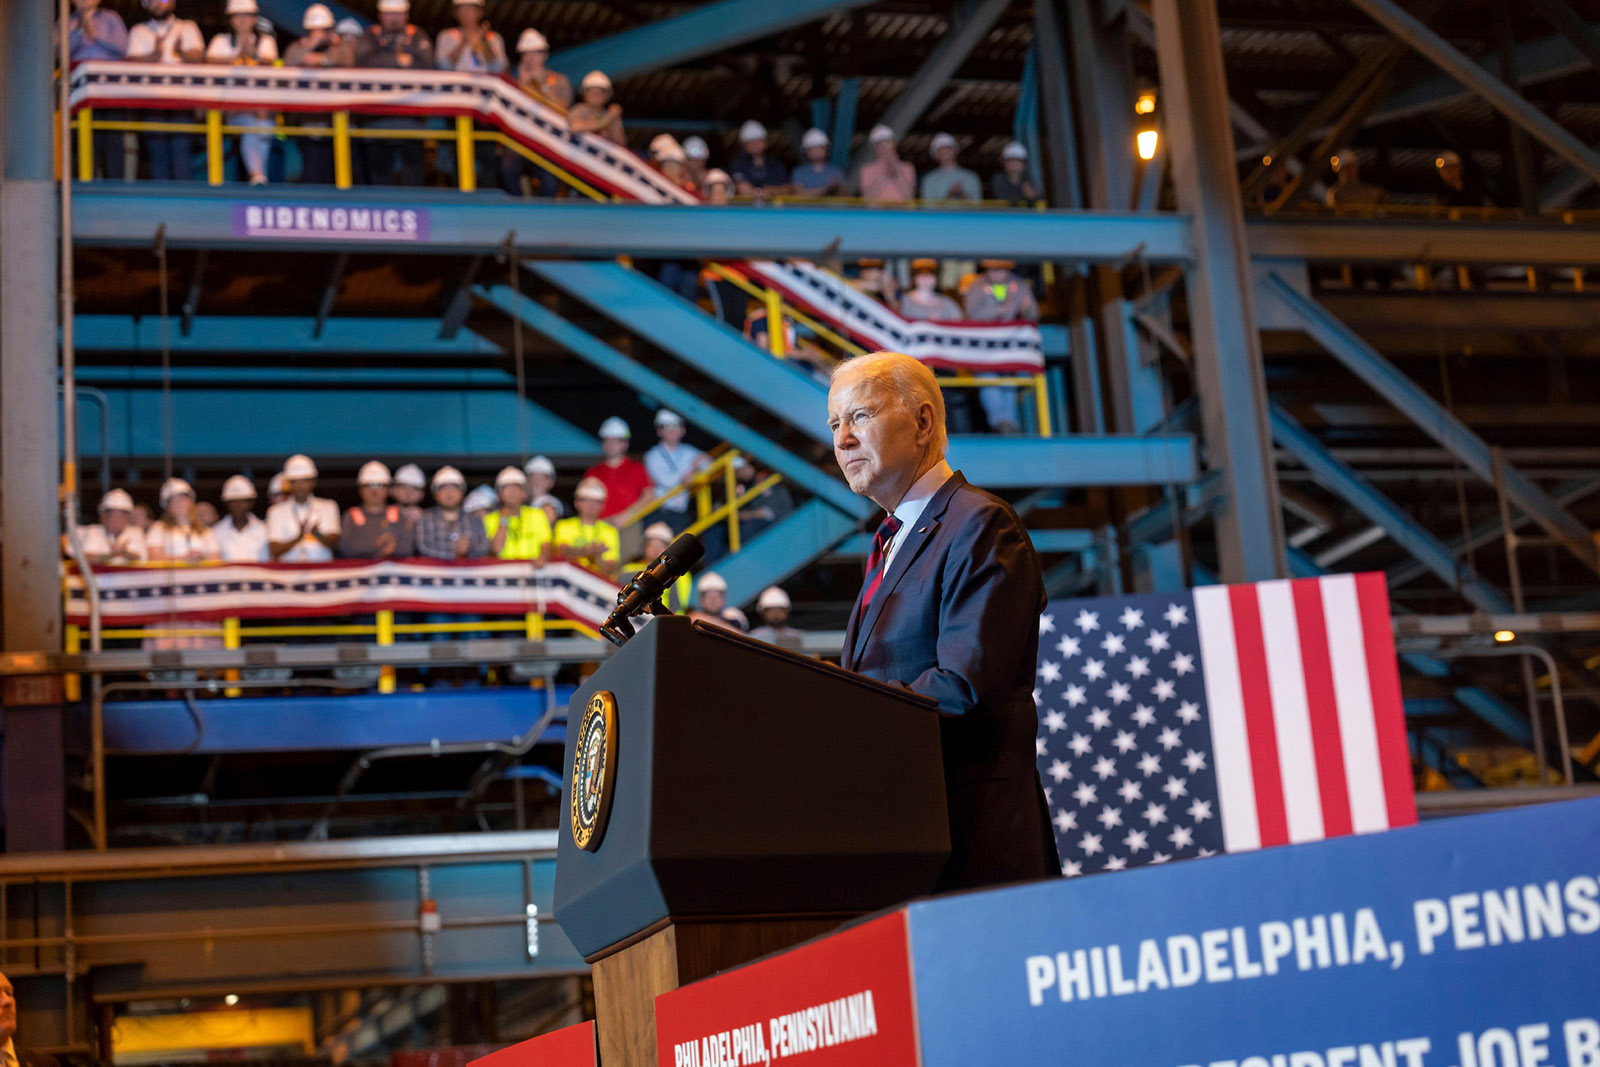 President Biden delivering remarks on the economy at the Philly Shipyard